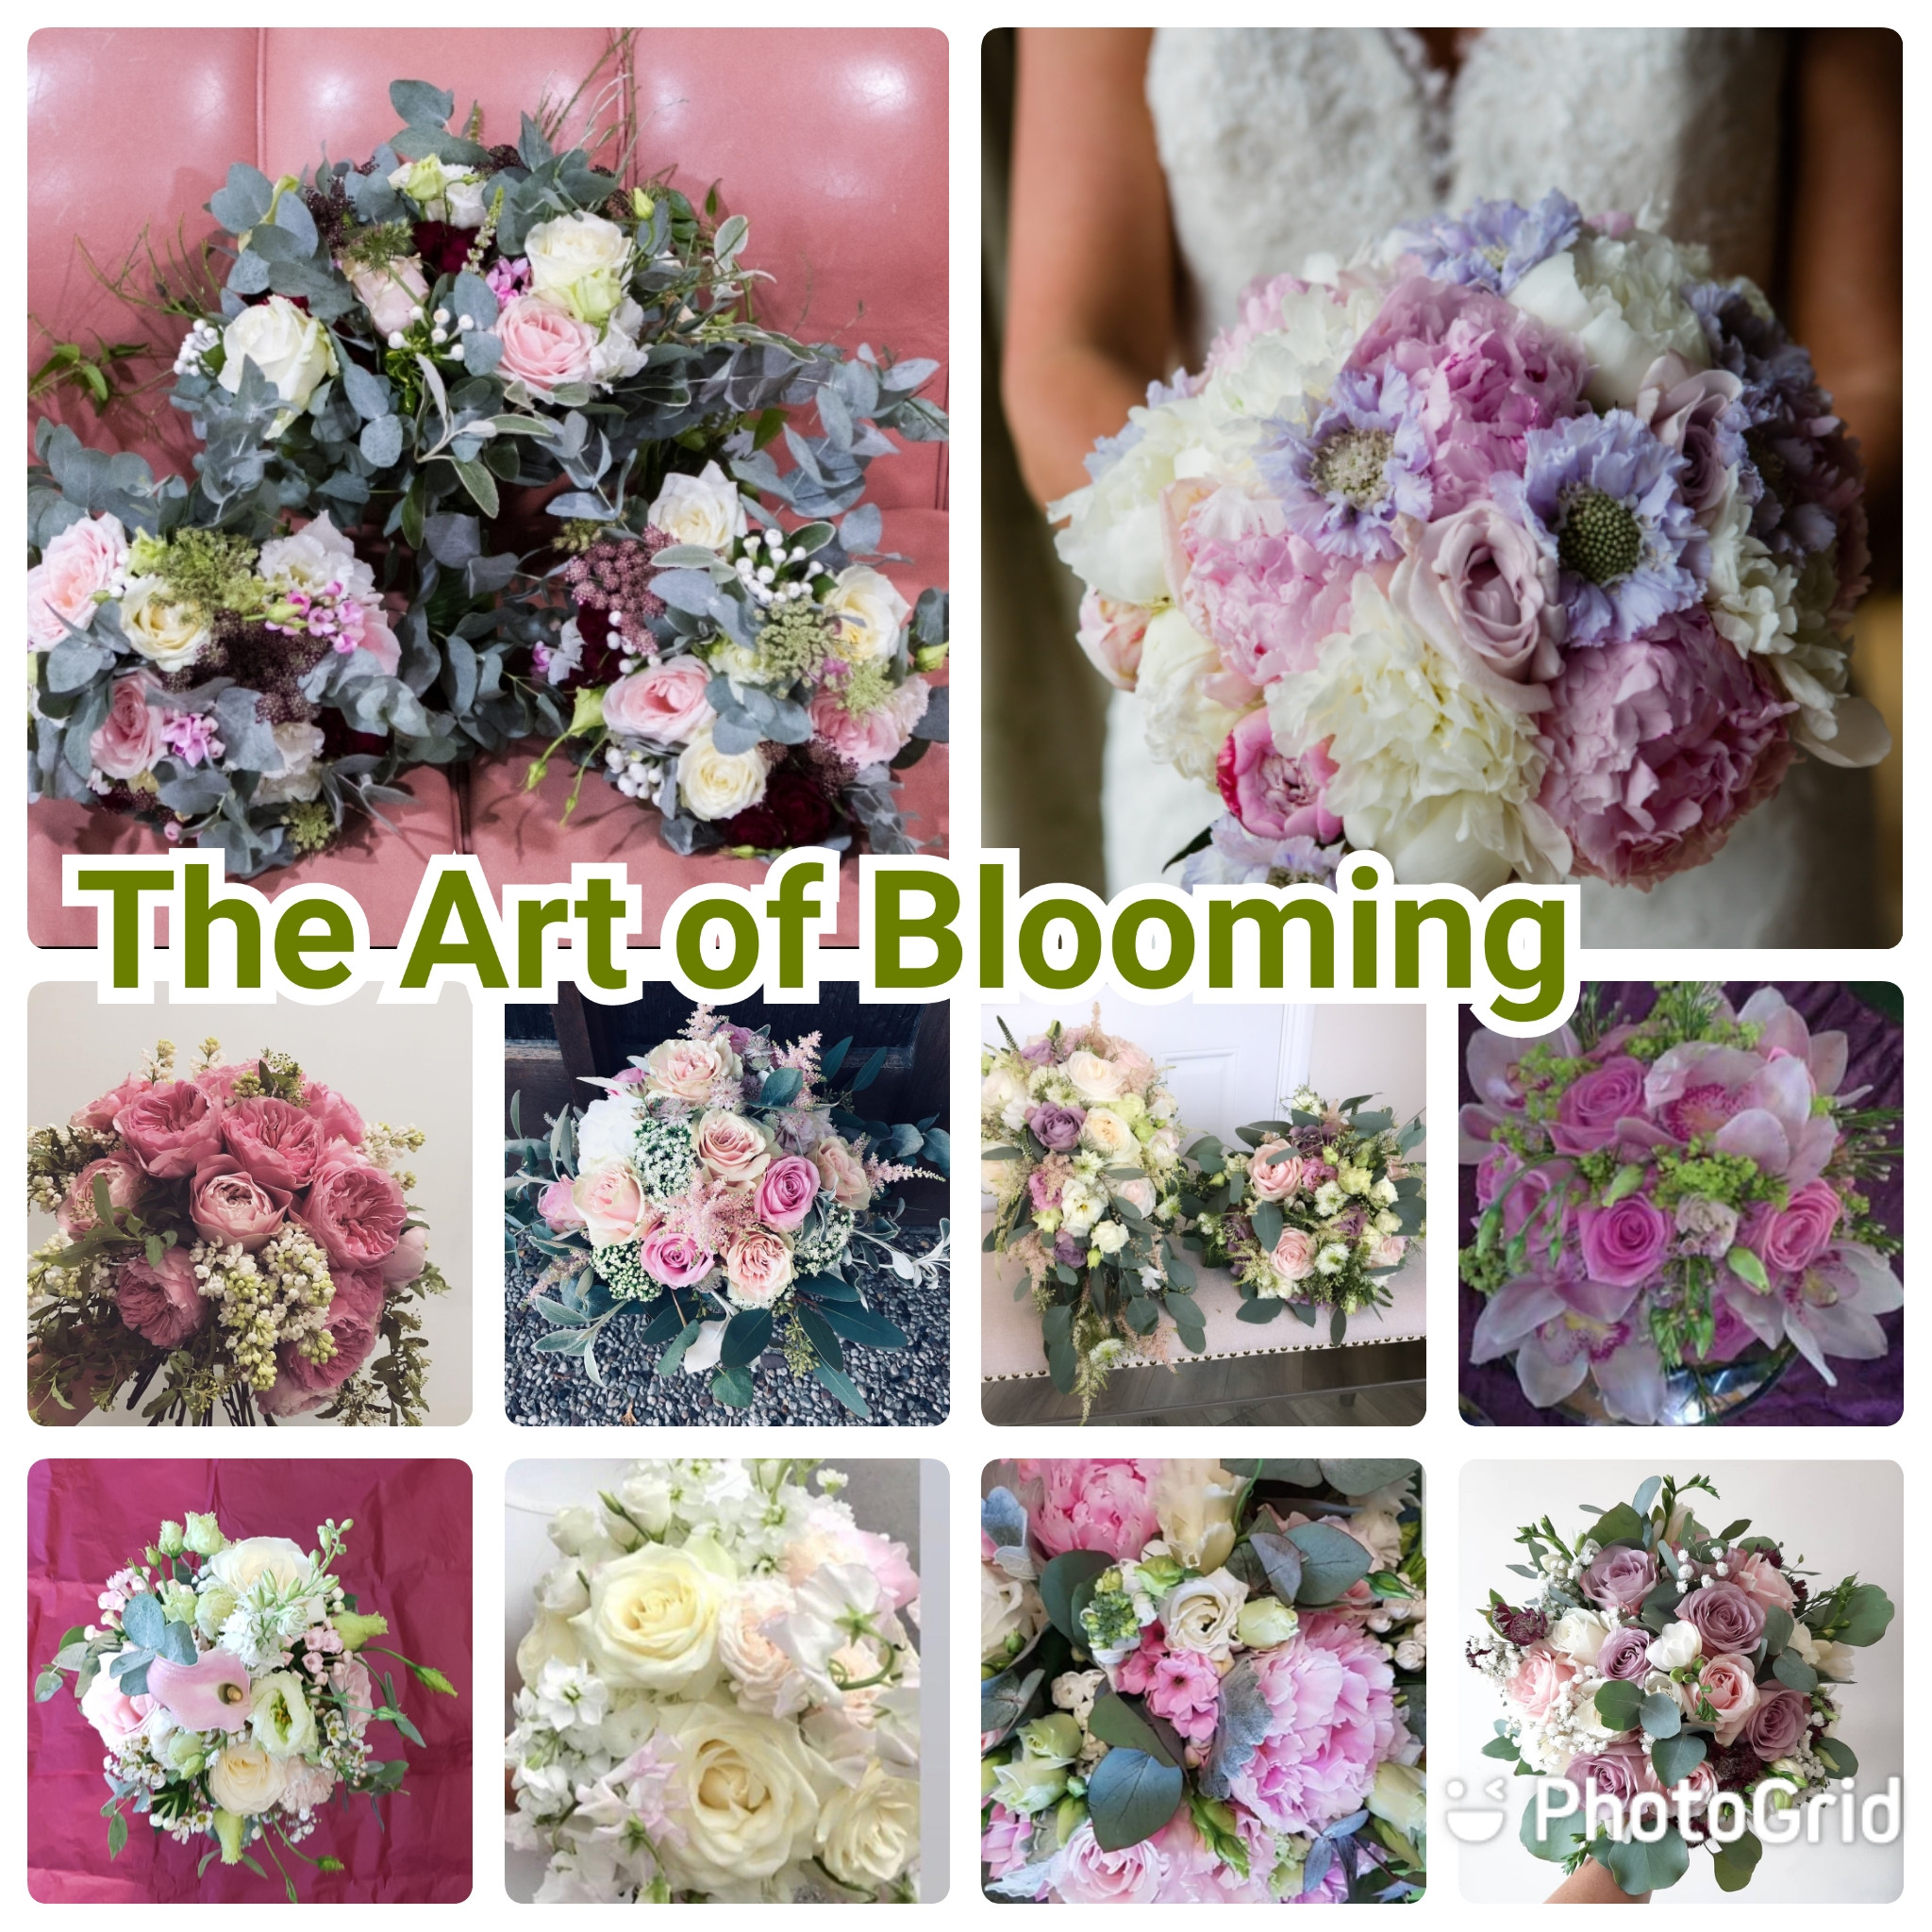 The Art of Blooming